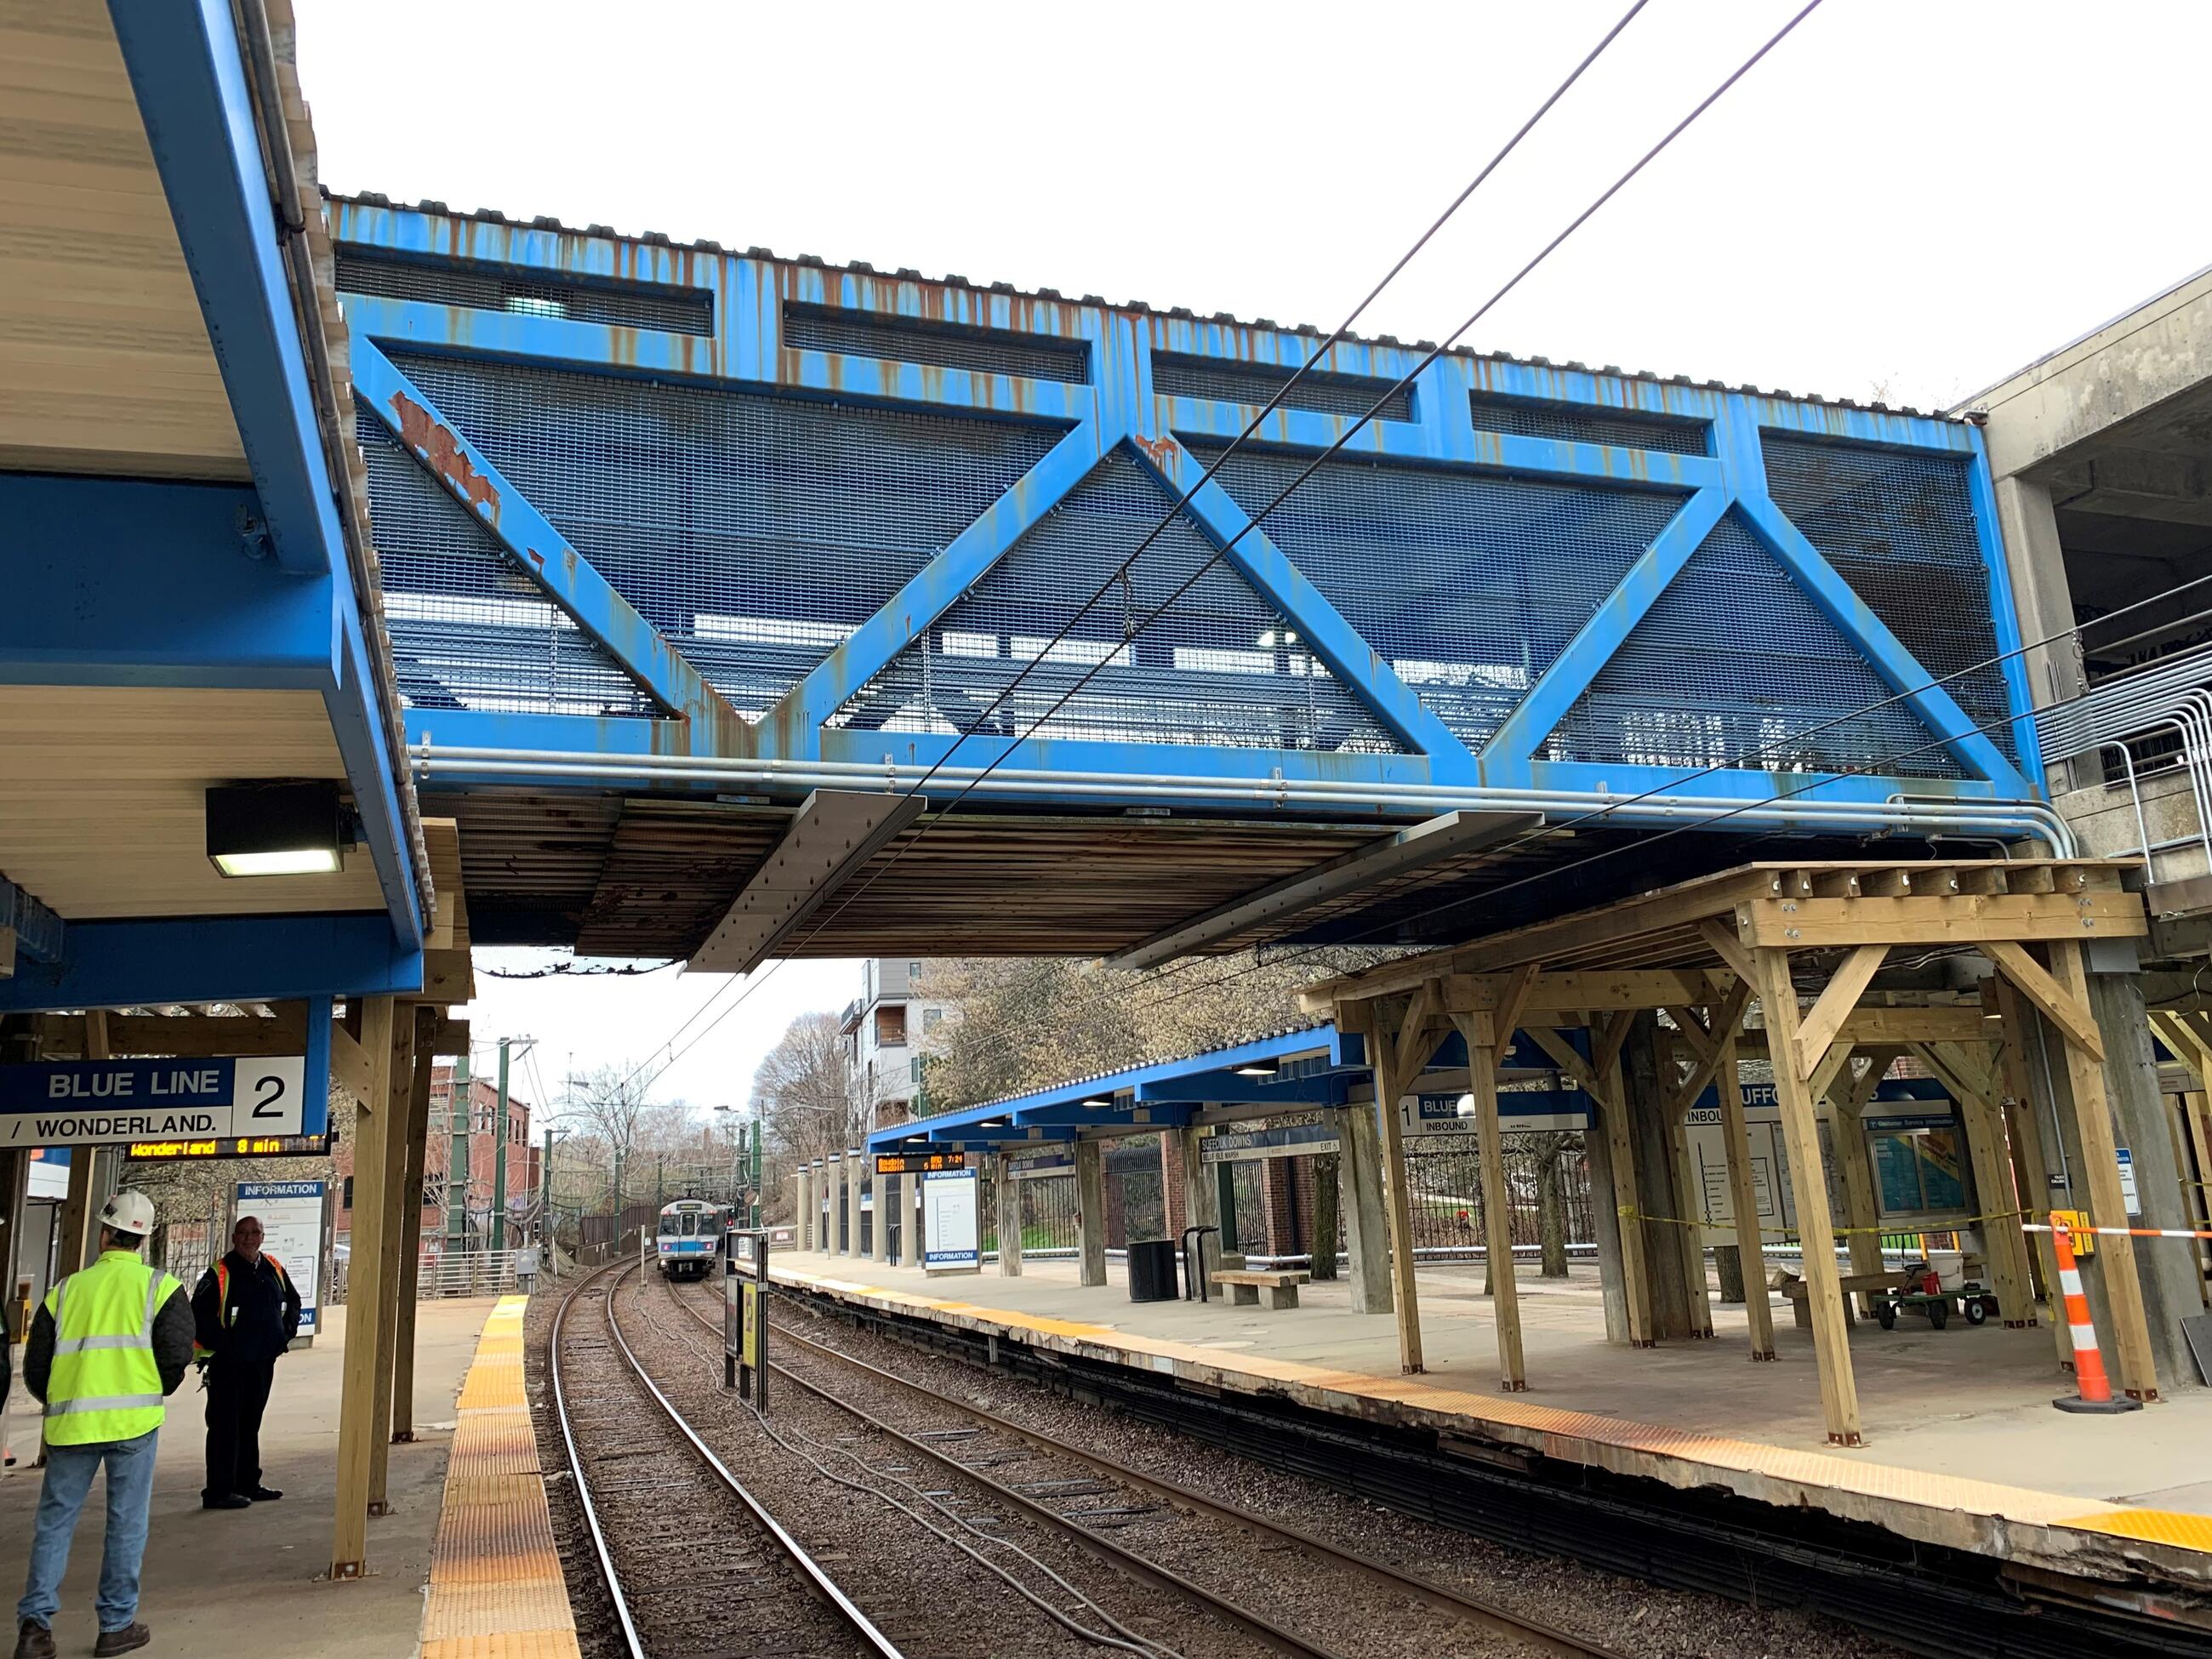 The blue-painted steel pedestrian bridge at Suffolk Downs station on the Blue Line is closed for repairs to begin in spring 2022. The bridge connects the Bennington and Walley street platforms. 